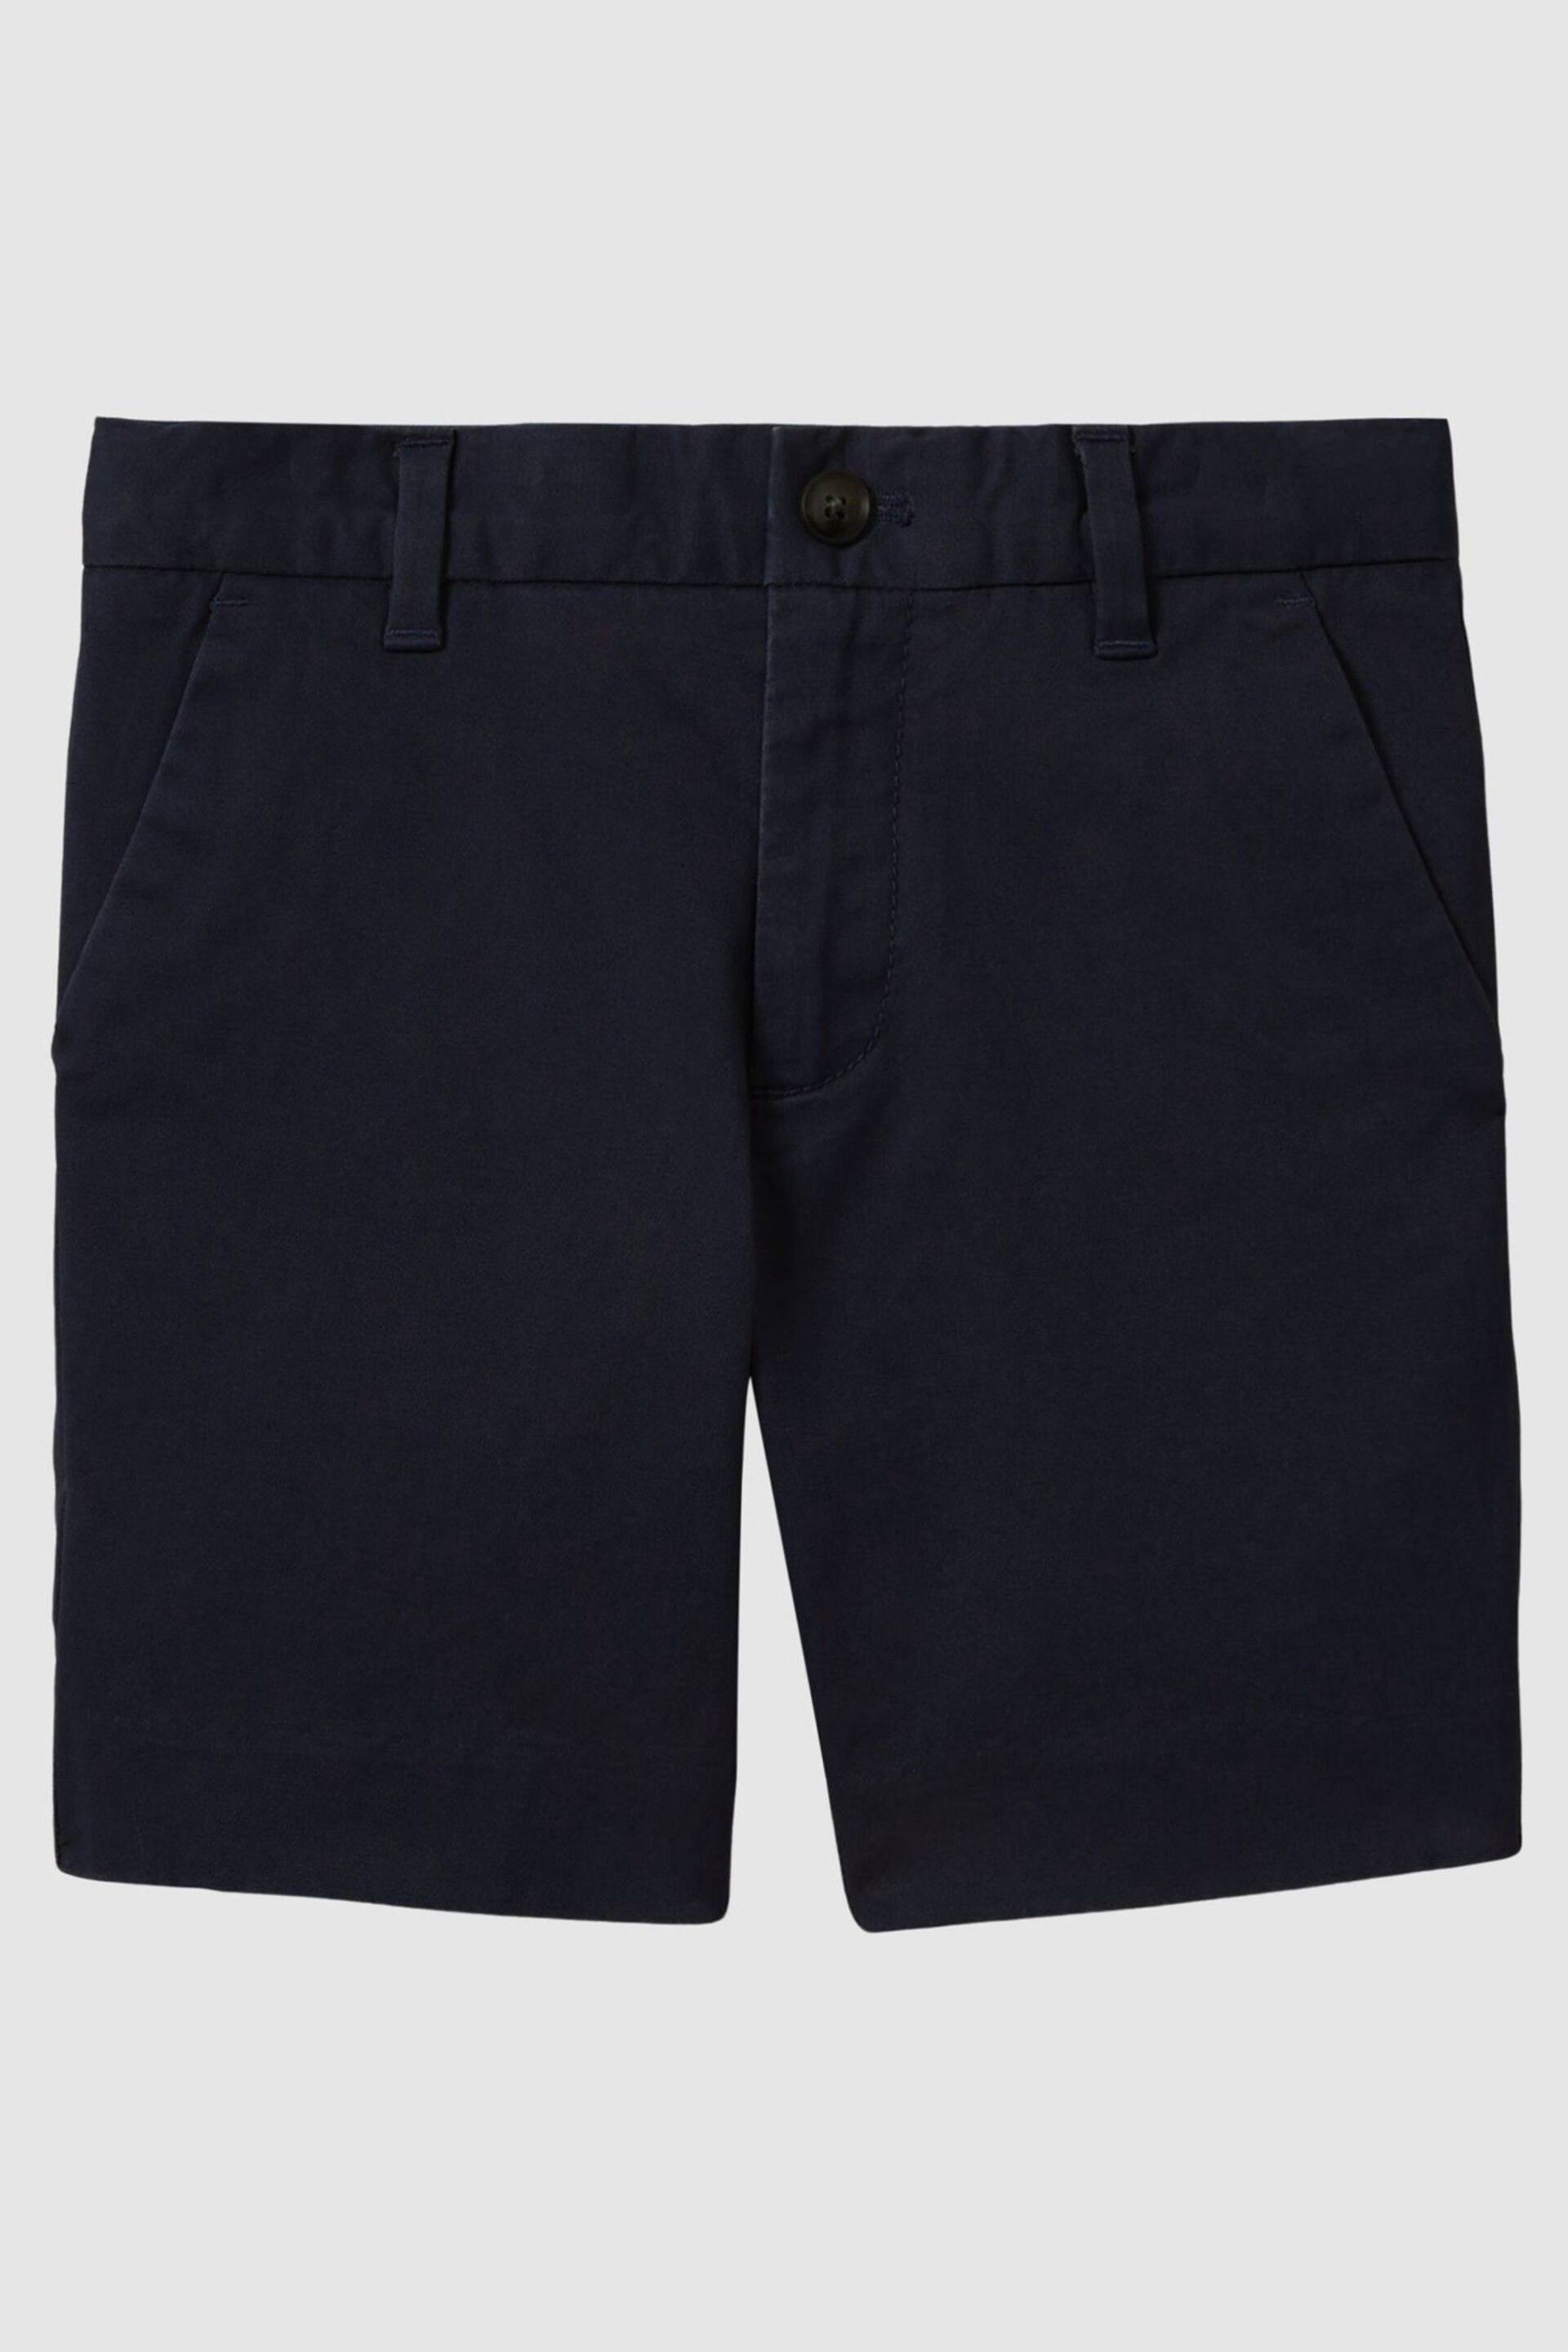 Reiss Navy Wicket Senior Casual Chino Shorts - Image 2 of 5